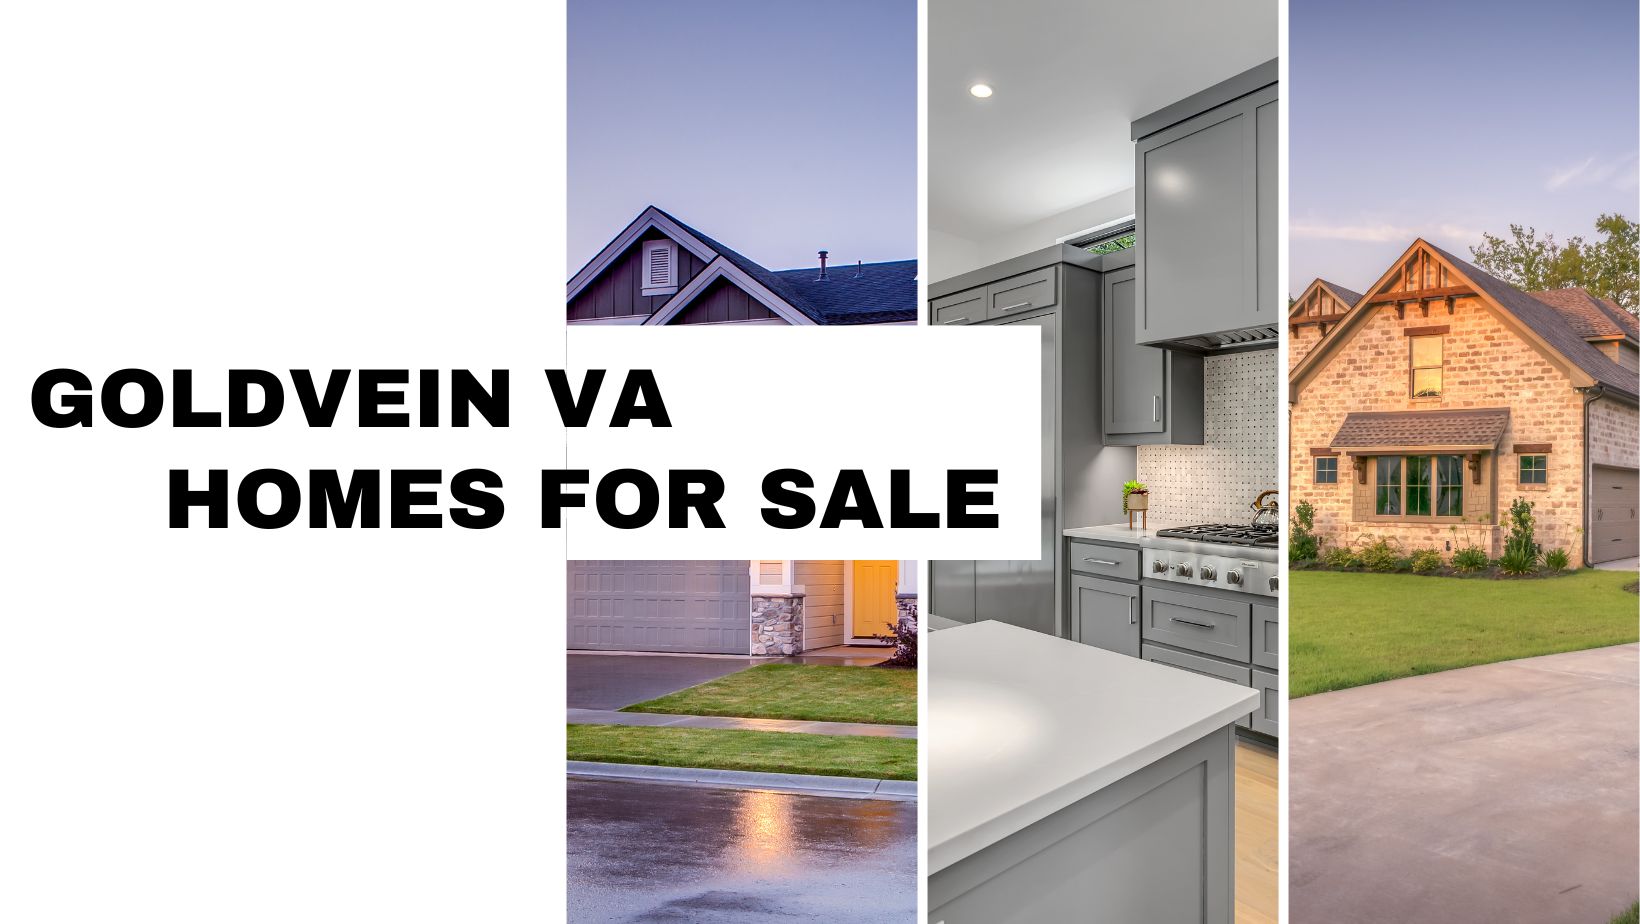 Goldvein VA Homes for Sale Fauquier County